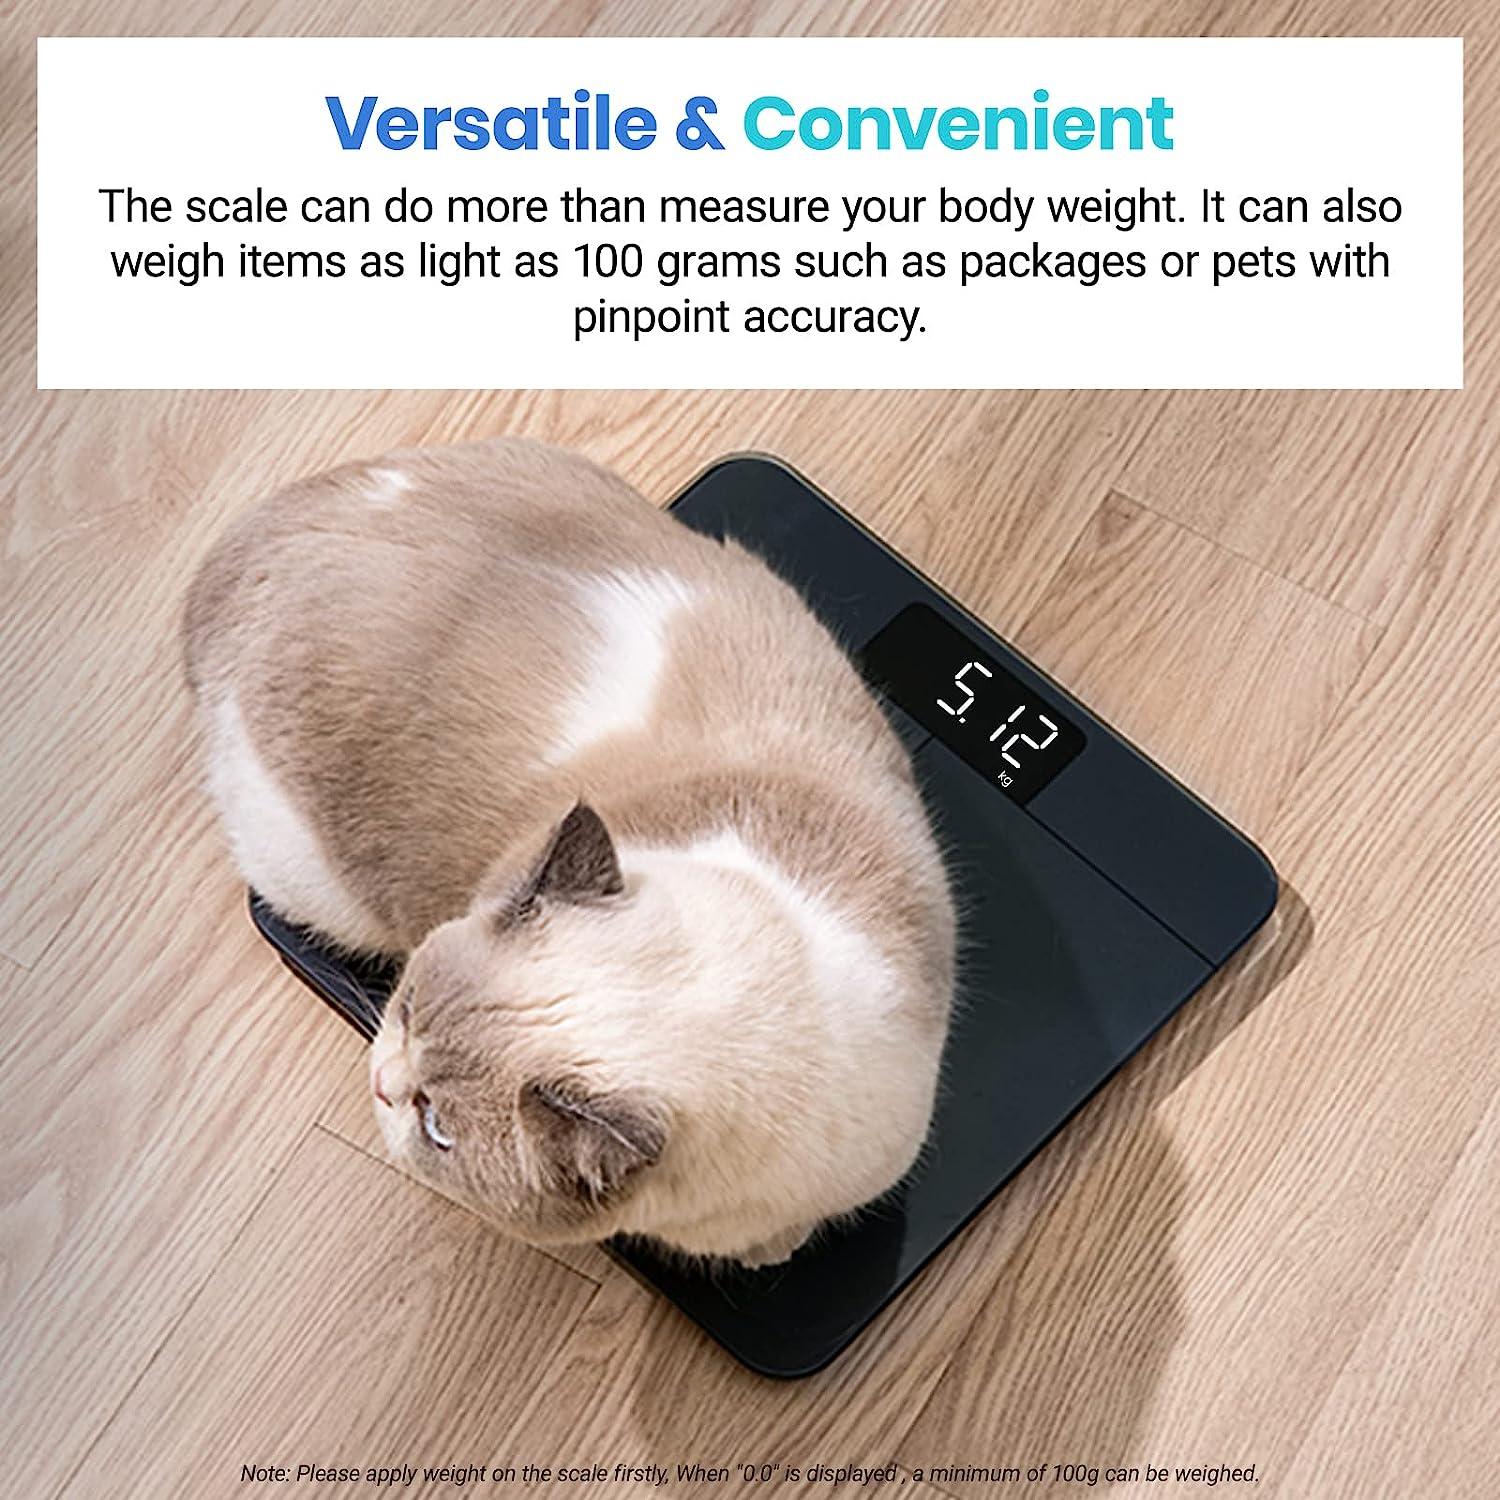 Etekcity Scale for Body Weight, Digital Bathroom Scale for People